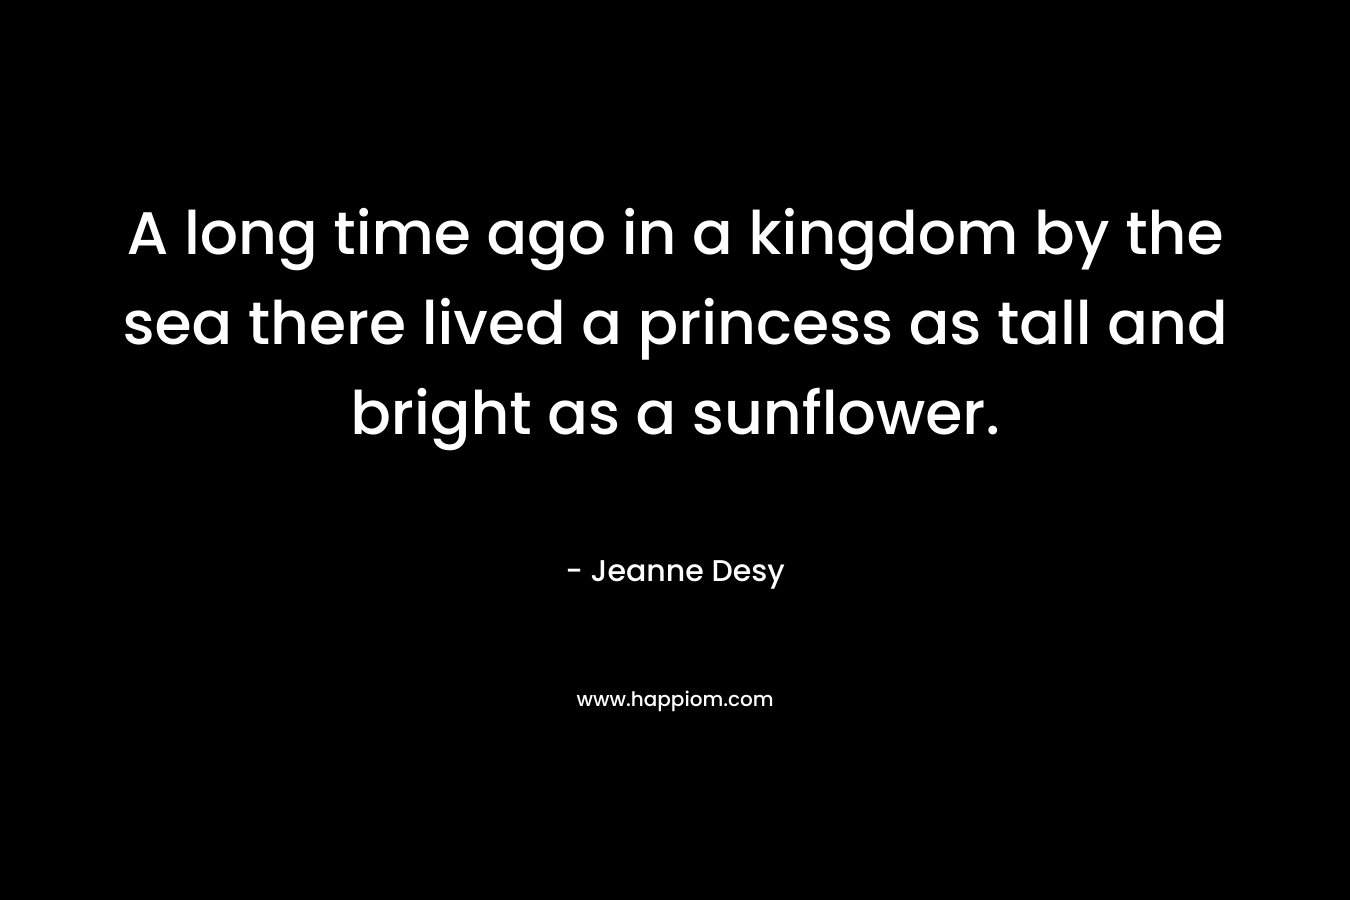 A long time ago in a kingdom by the sea there lived a princess as tall and bright as a sunflower.